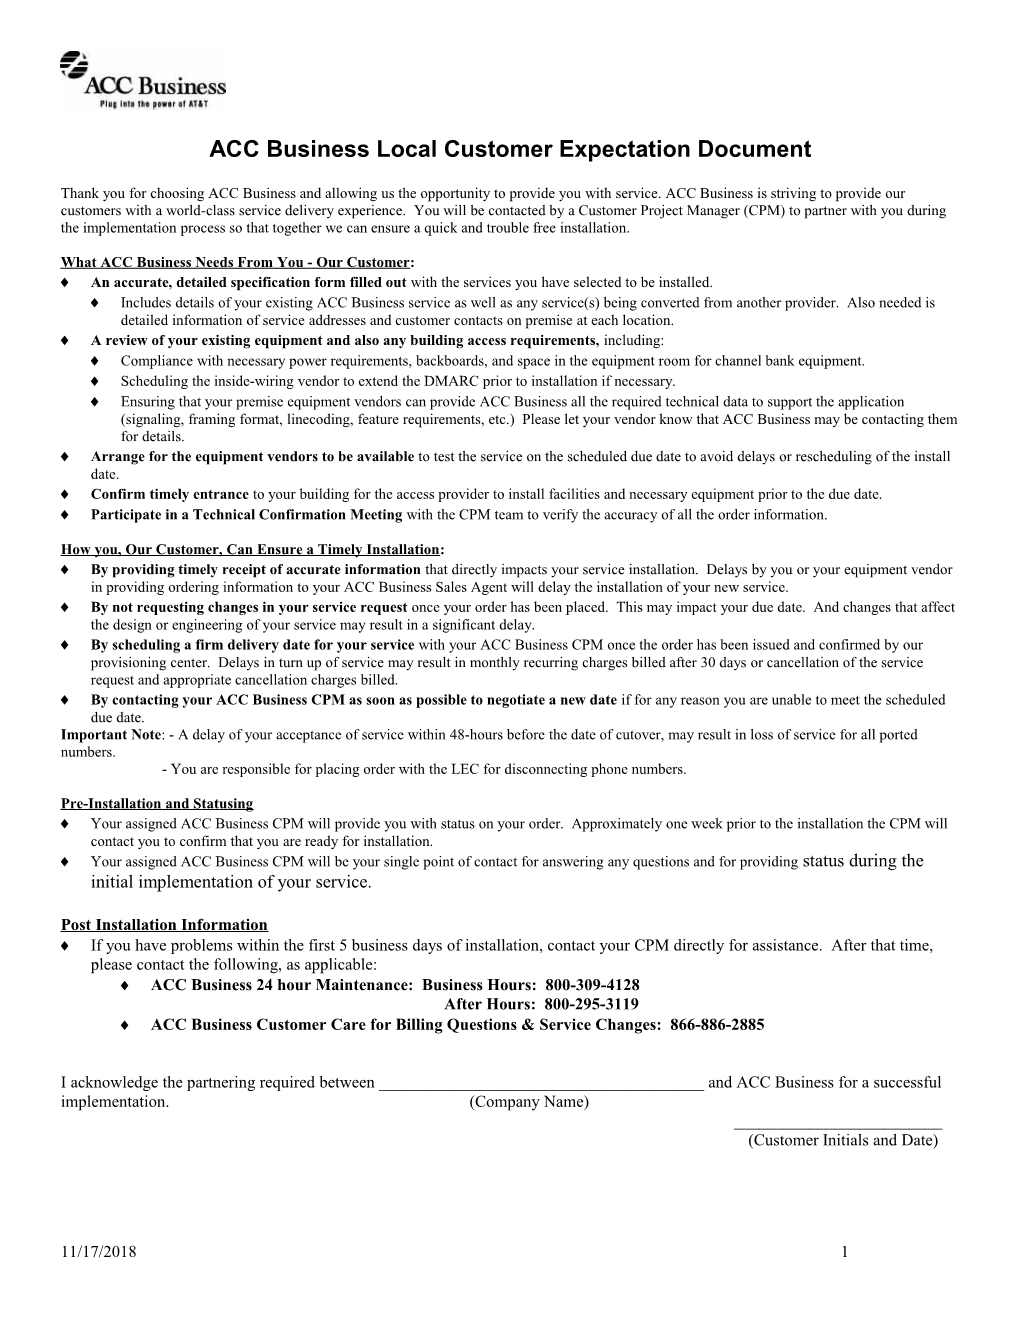 ACC Business Customer Expectation Document